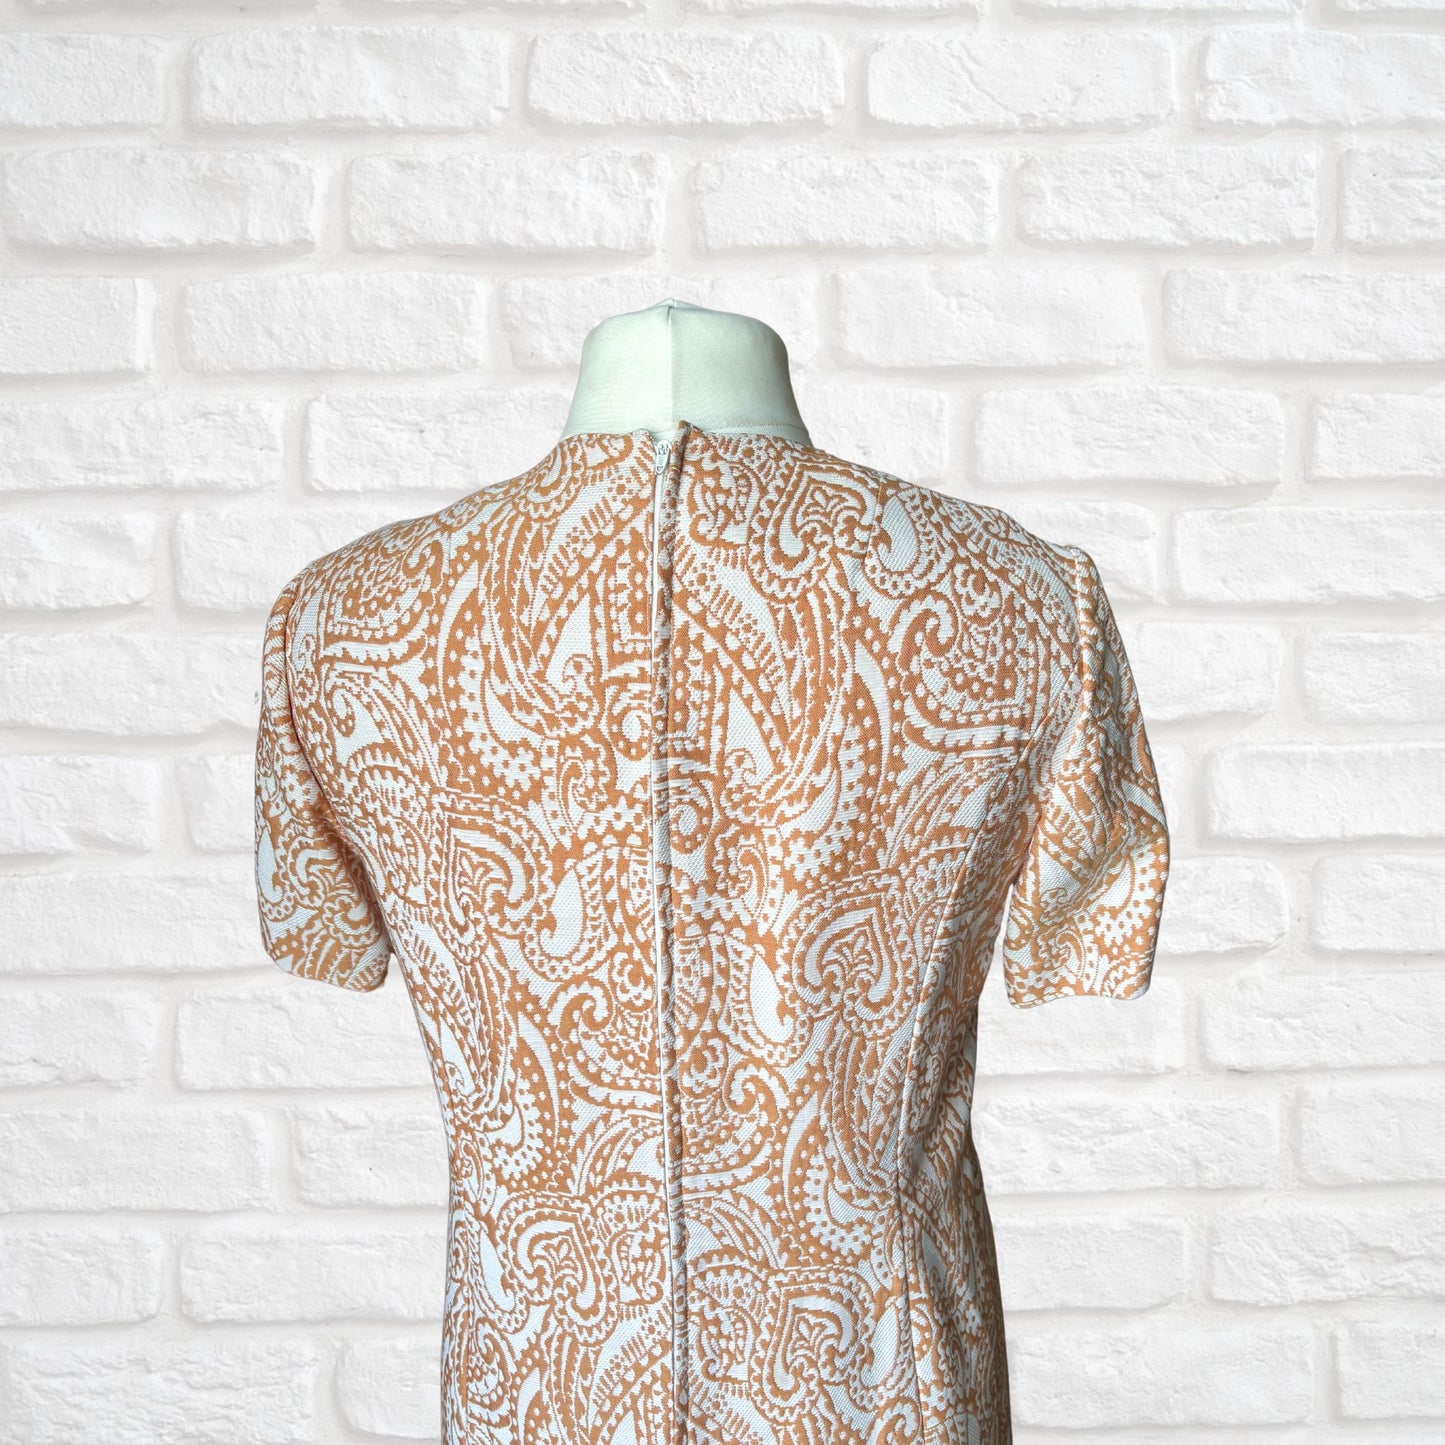 Vintage White and Peach Paisley Brocade 60s Scooter Dress  . Approx U.K.size 16